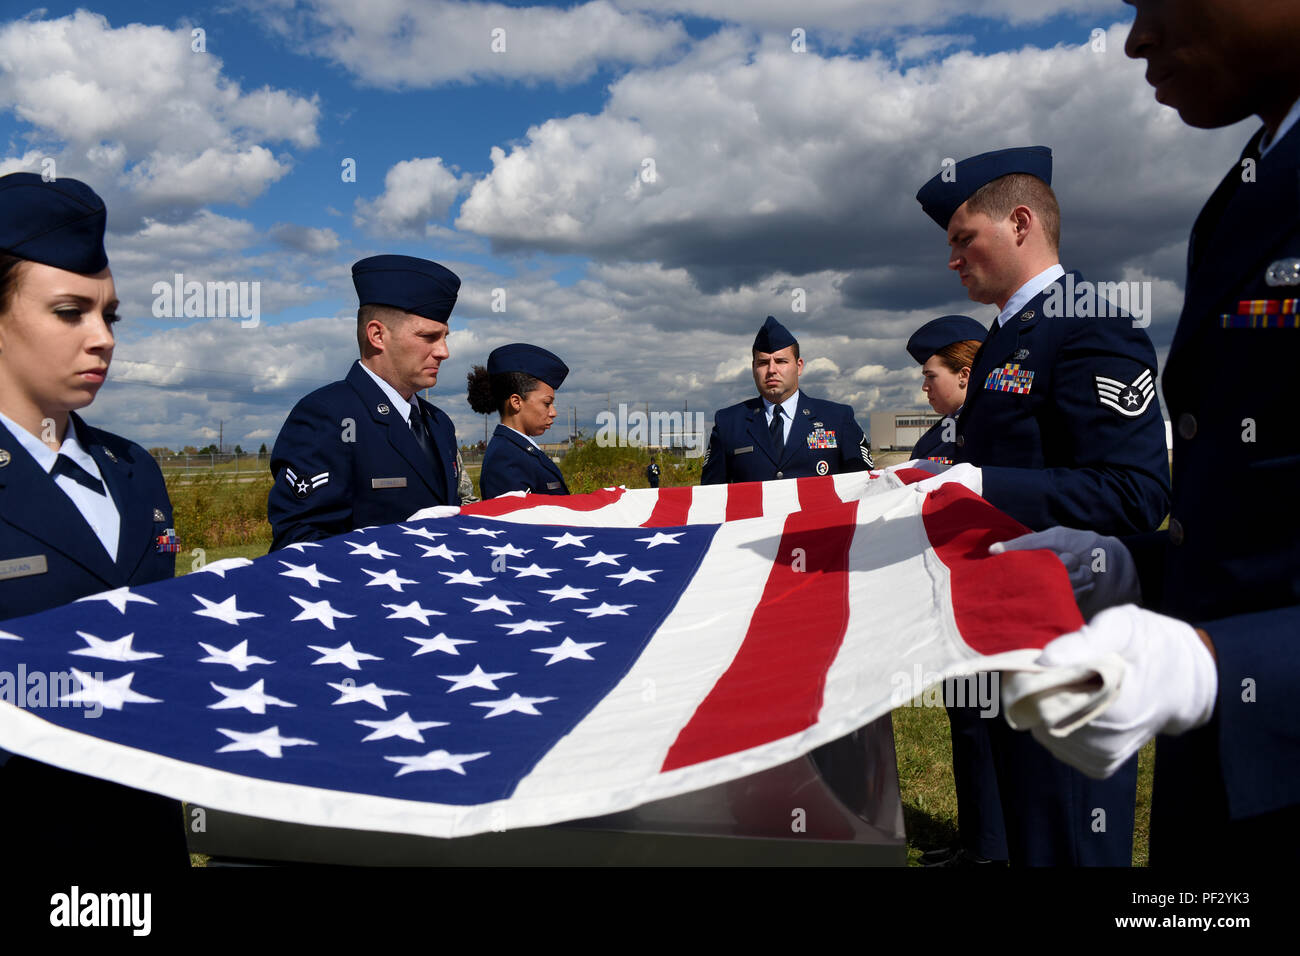 Ohio Air National Guard Master Sgt. Daniel Petry (center) oversees new Base Honor Guard Team members as they perform a flag-folding detail during training in October 2015 at Rickenbacker Air National Guard Base in Columbus, Ohio. The Base Honor Guard Team serving the Wright-Patterson Air Force Base Area of Responsibility comprises about 115 National Guard, Air Force Reserve and active-duty Airmen who live in and serve Ohio, Indiana, West Virginia, Kentucky, Pennsylvania and Michigan, and performs more than 5,000 funerals a year for veterans and other eligible service members. (Ohio National Gu Stock Photo